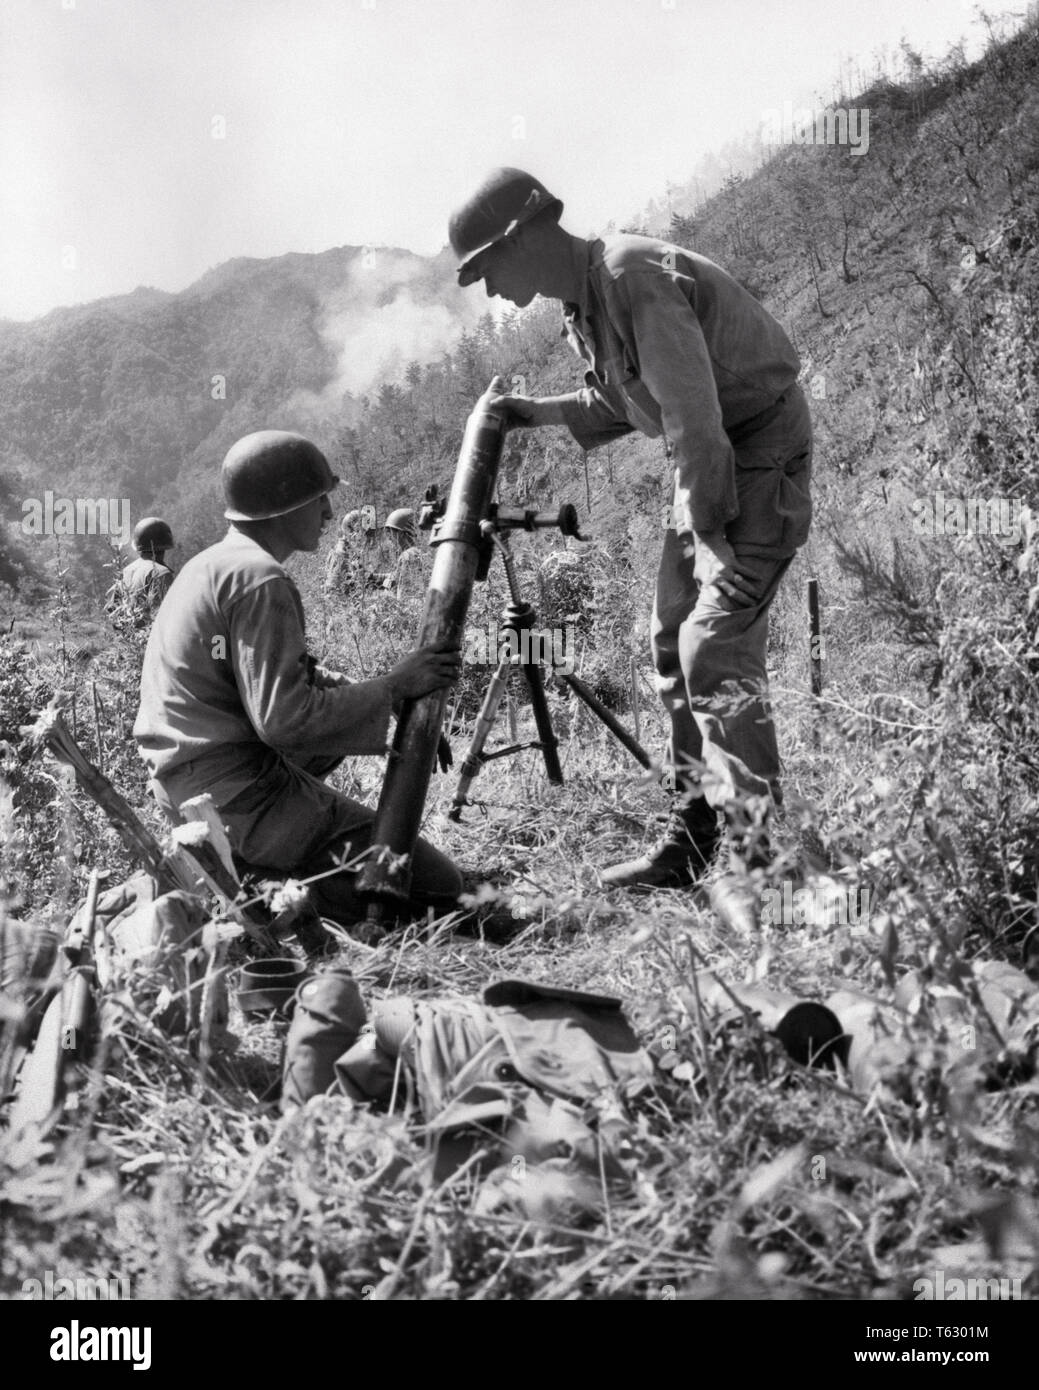 1950s SEPTEMBER 1951 US ARMY 2ND INFANTRY DIVISION SOLDIERS ON HEARTBREAK RIDGE FIRE 81MM MORTAR AT COMMUNIST ENEMY TROOPS KOREA - q74029 CPC001 HARS RURAL COPY SPACE FULL-LENGTH PERSONS MALES RISK CONFIDENCE B&W STRENGTH COURAGE EXCITEMENT ENEMY AT INFANTRYMEN ON FIRING OCCUPATIONS TROOPS UNIFORMS INFANTRYMAN 1951 CONCEPTUAL KOREAN WAR KOREA POLICE ACTION COMMUNIST INFANTRY YOUNG ADULT MAN BLACK AND WHITE CAUCASIAN ETHNICITY OLD FASHIONED SEPTEMBER Stock Photo